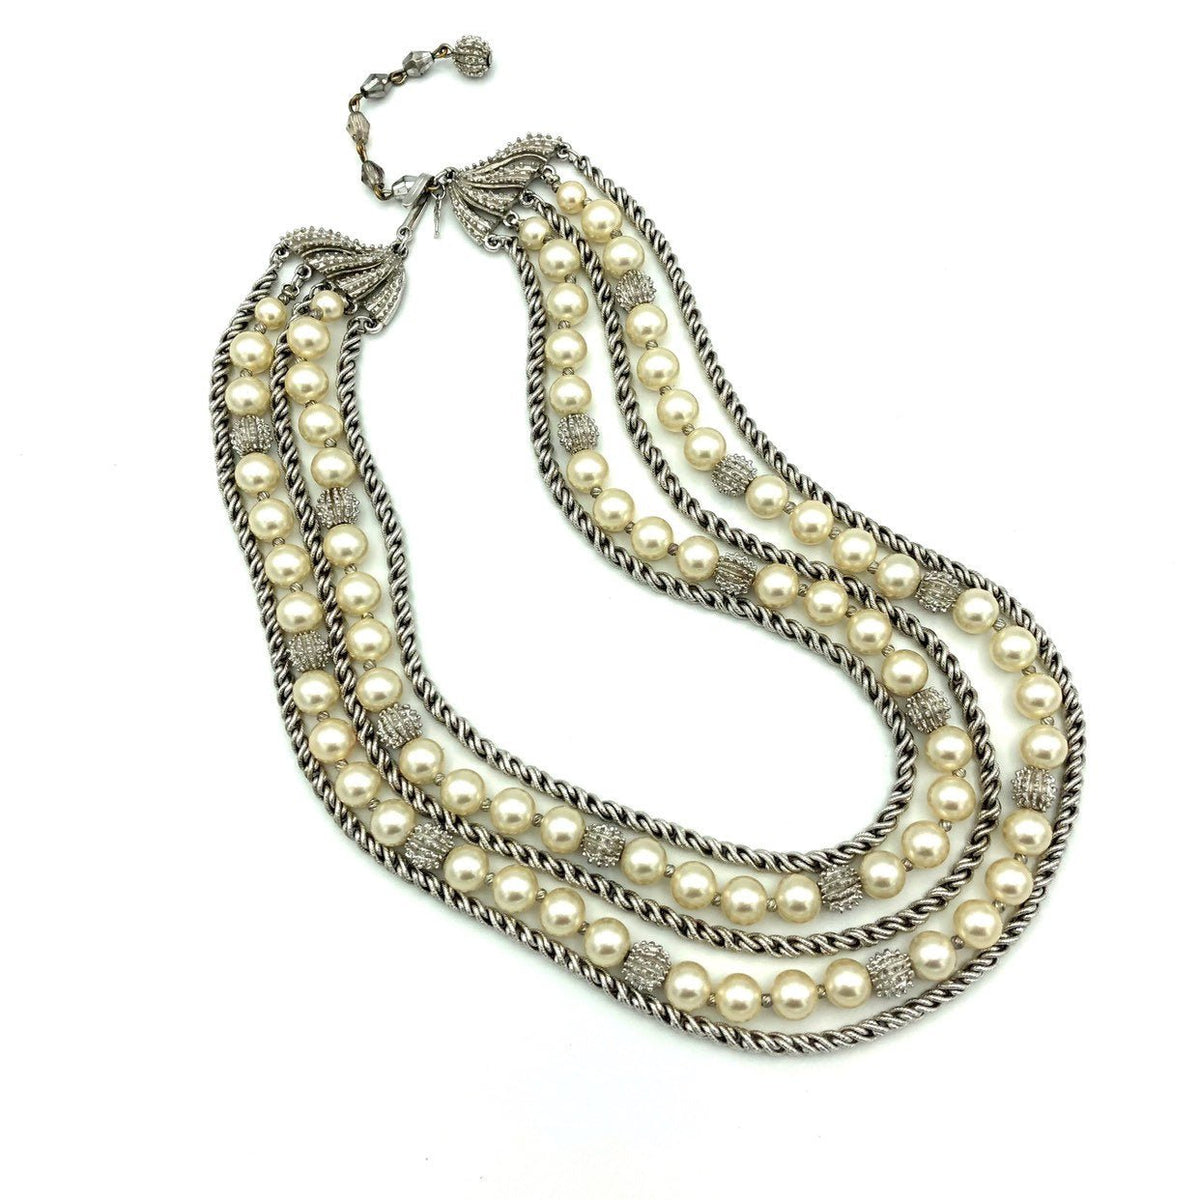 Vintage Silver Trifari Multi-Strand Layered Pearl Classic Necklace - 24 Wishes Vintage Jewelry